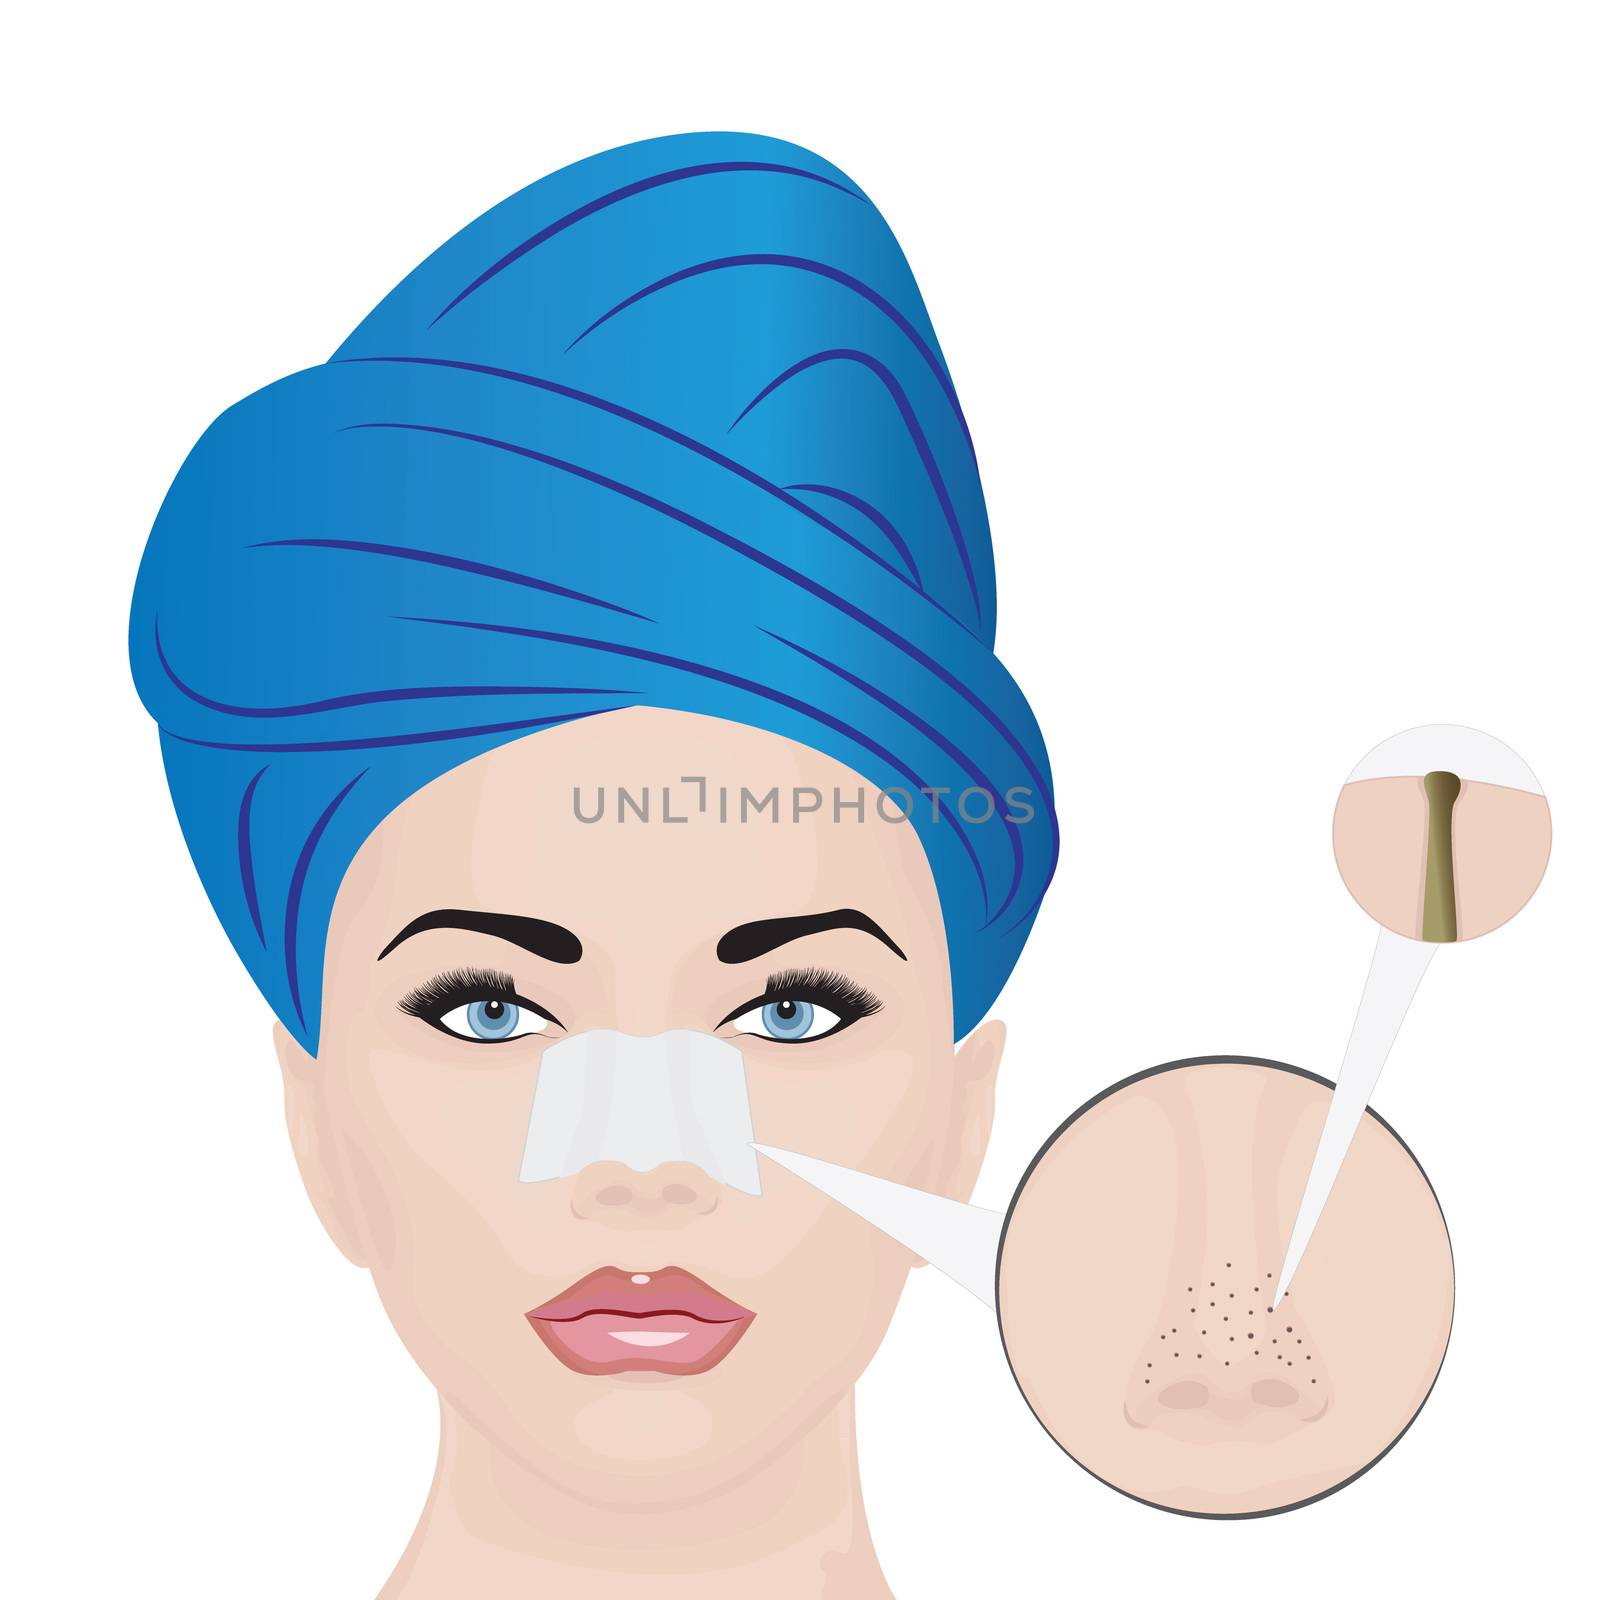 Treatment Blackheads on Nose vector illustration showing skin problems